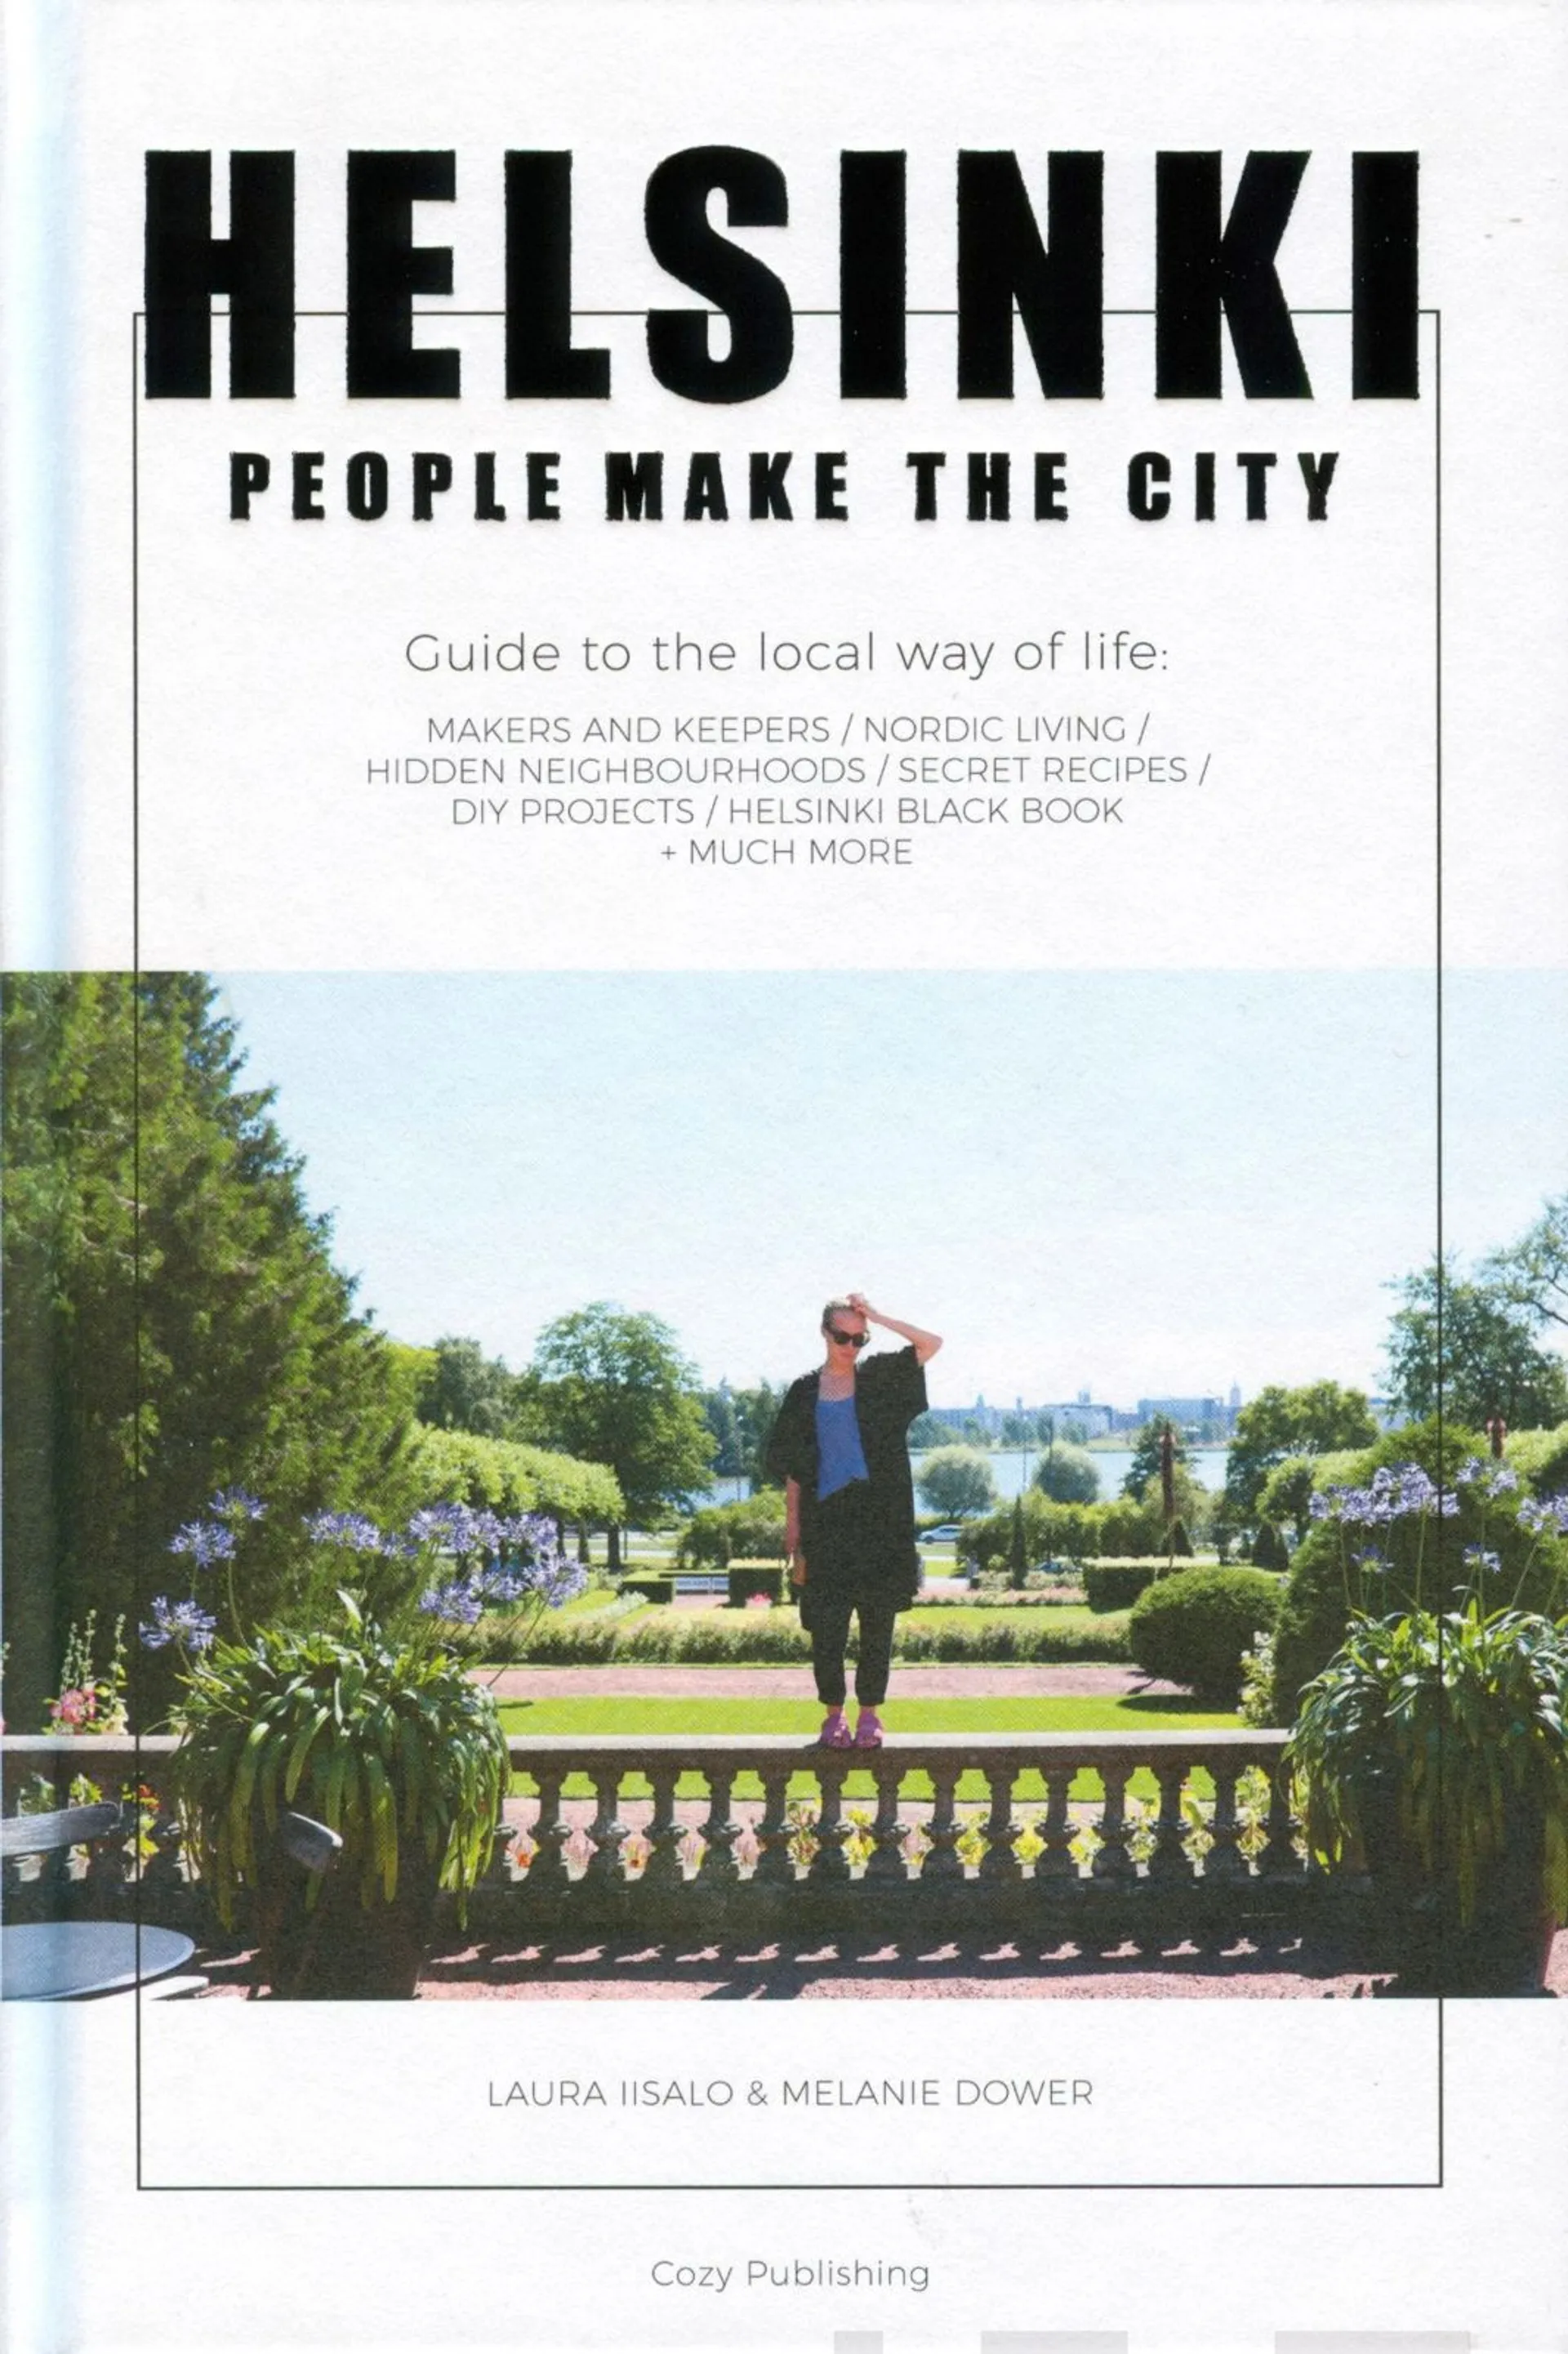 Dower, Helsinki - People make the city - Guide to the local way of life: makers and keepers/nordic living/hidden neighbourhoods/secret recipes/diy projects/Helsinki black book + much more